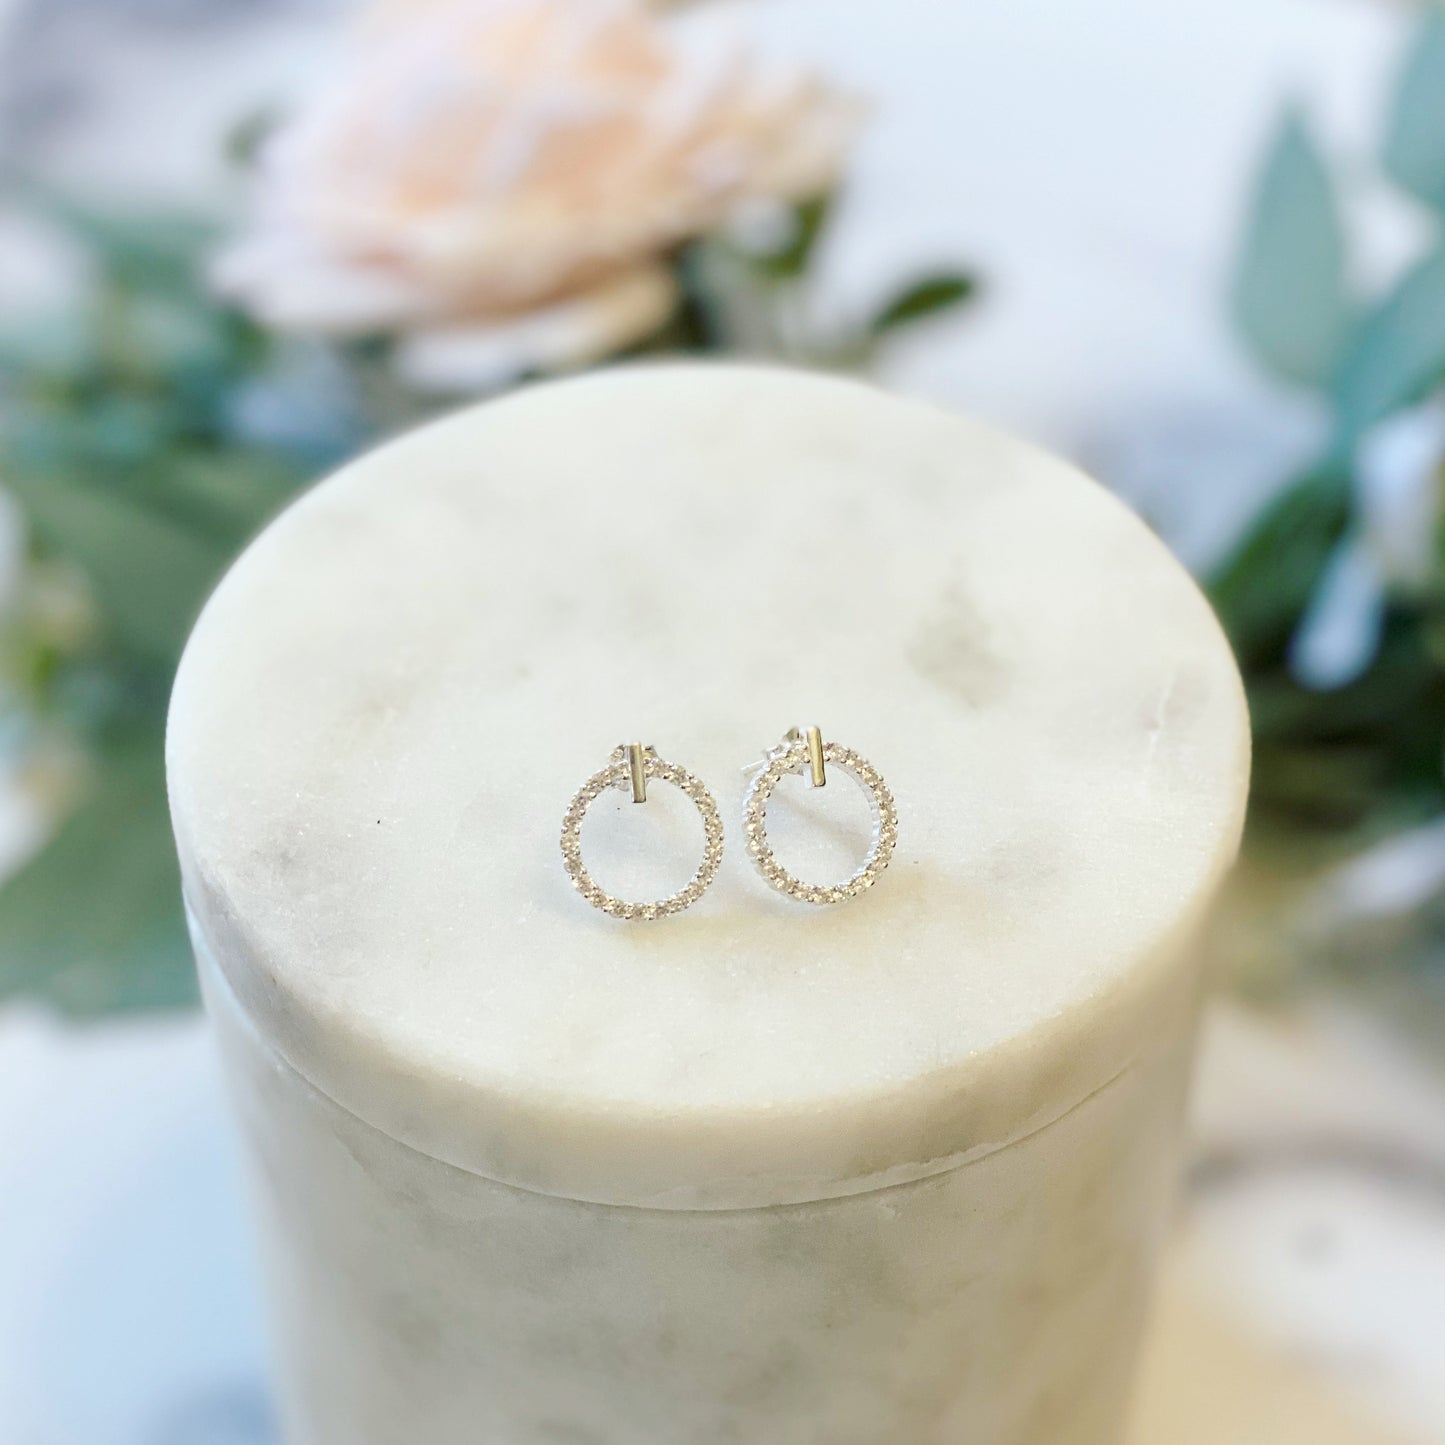 Just the Circle Cubic Zircon Stud earrings